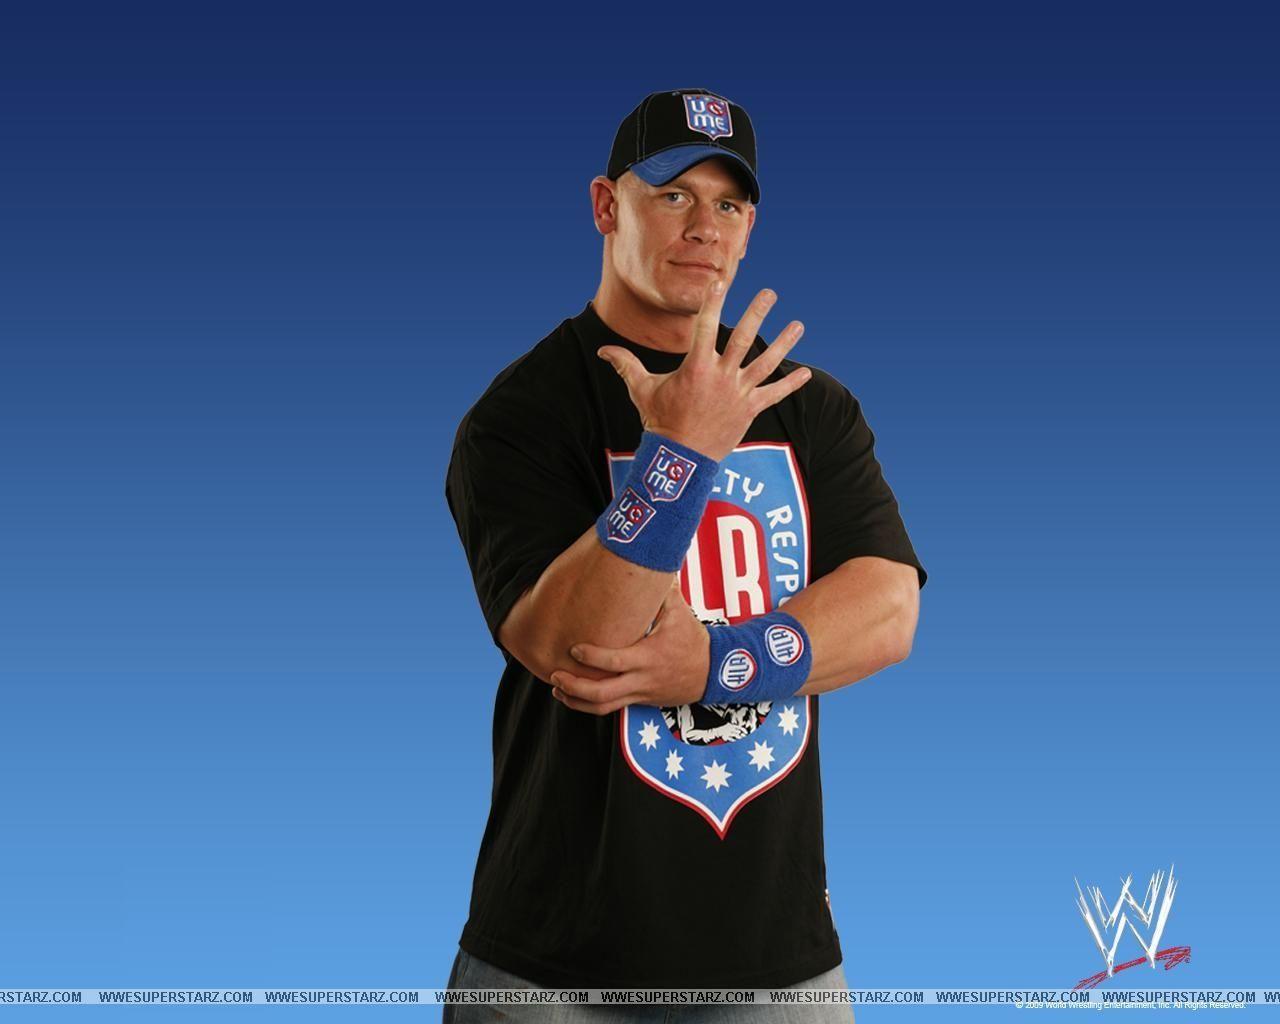 WWE SUPERSTAR JOHN CENA HD PICTURES PHOTOS AND IMAGES